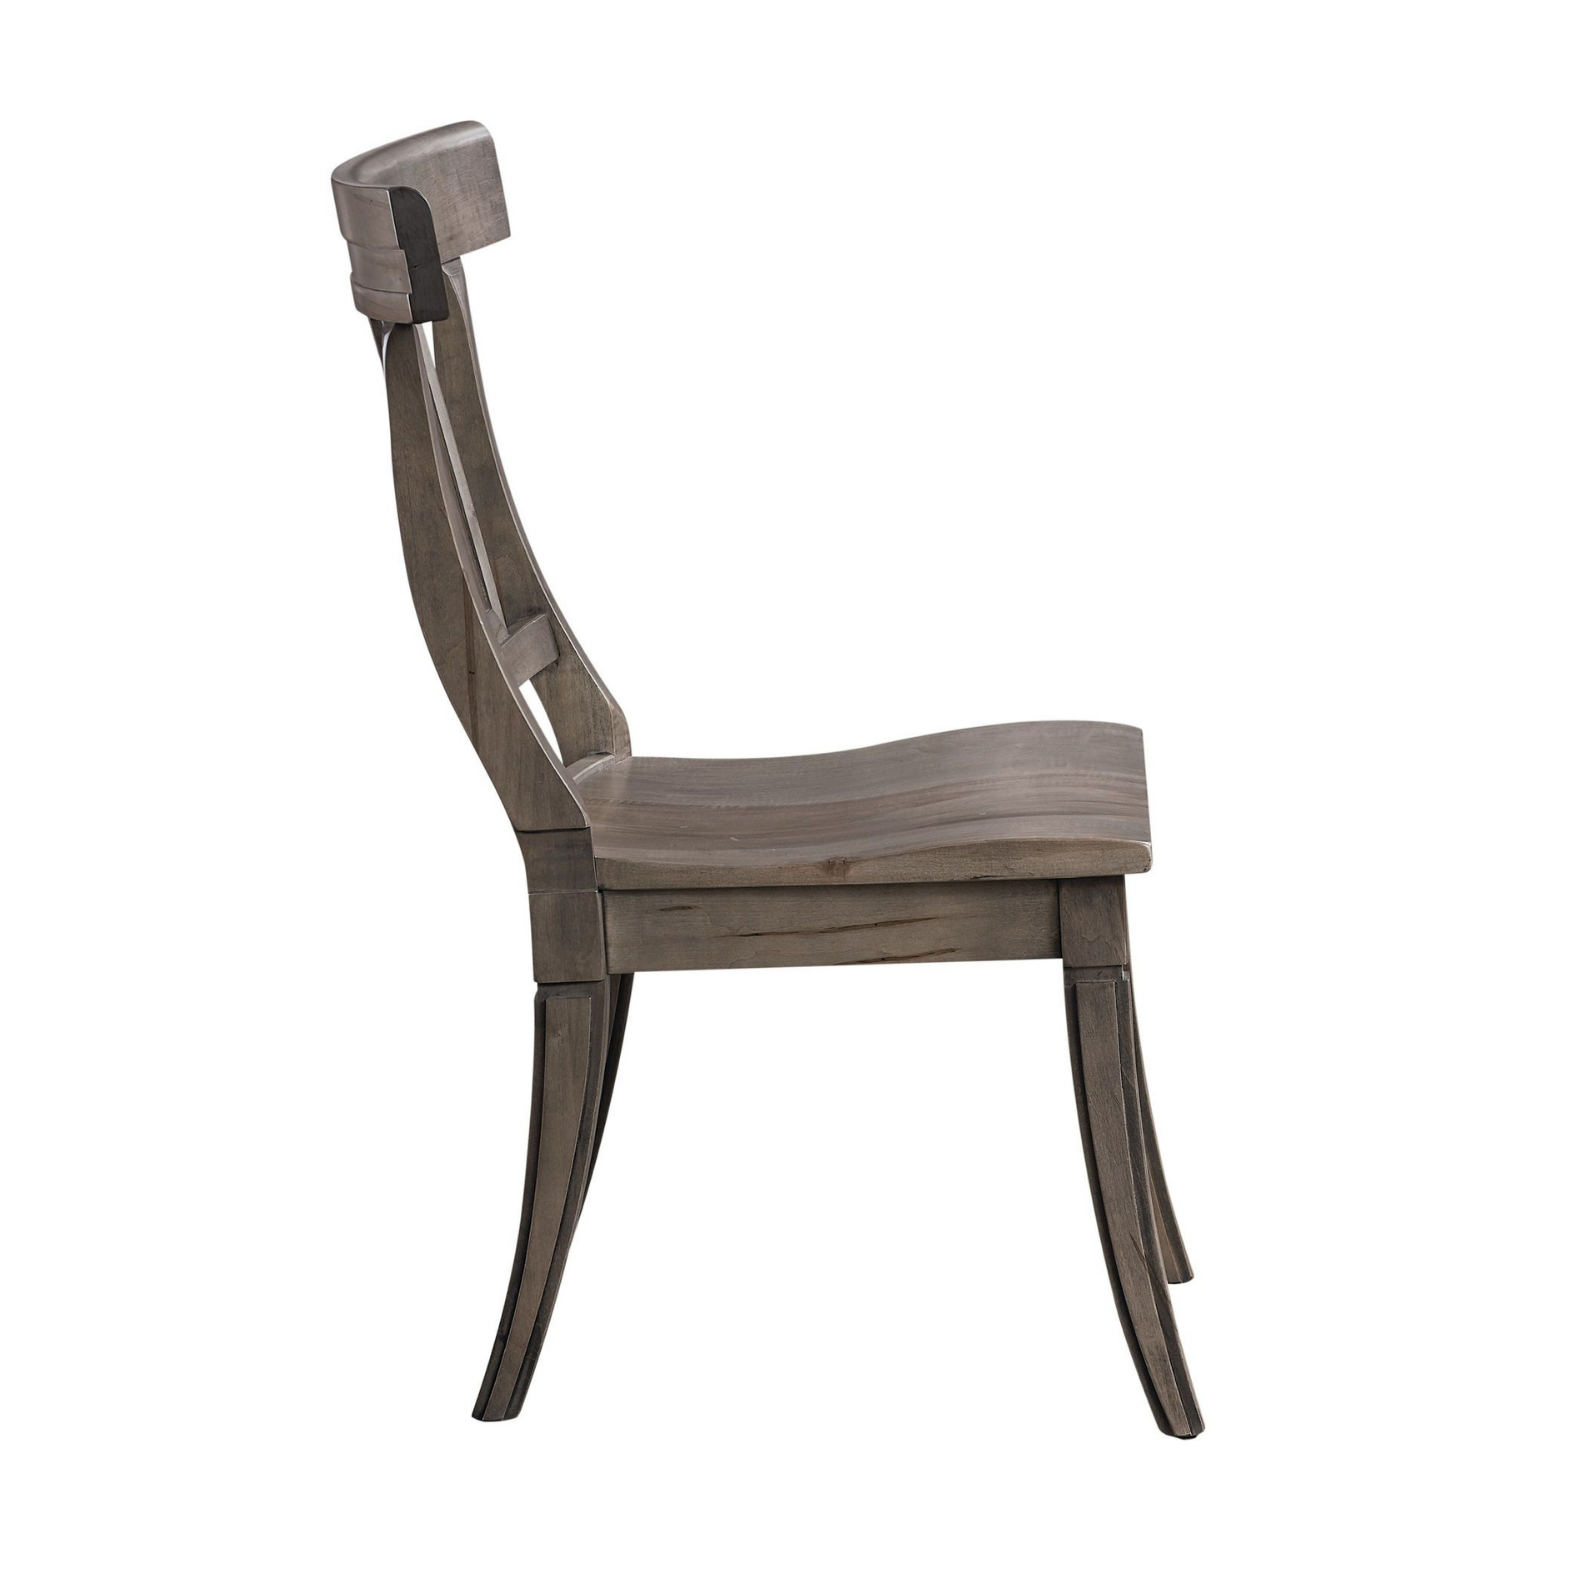 Baxter Maple Side Chair